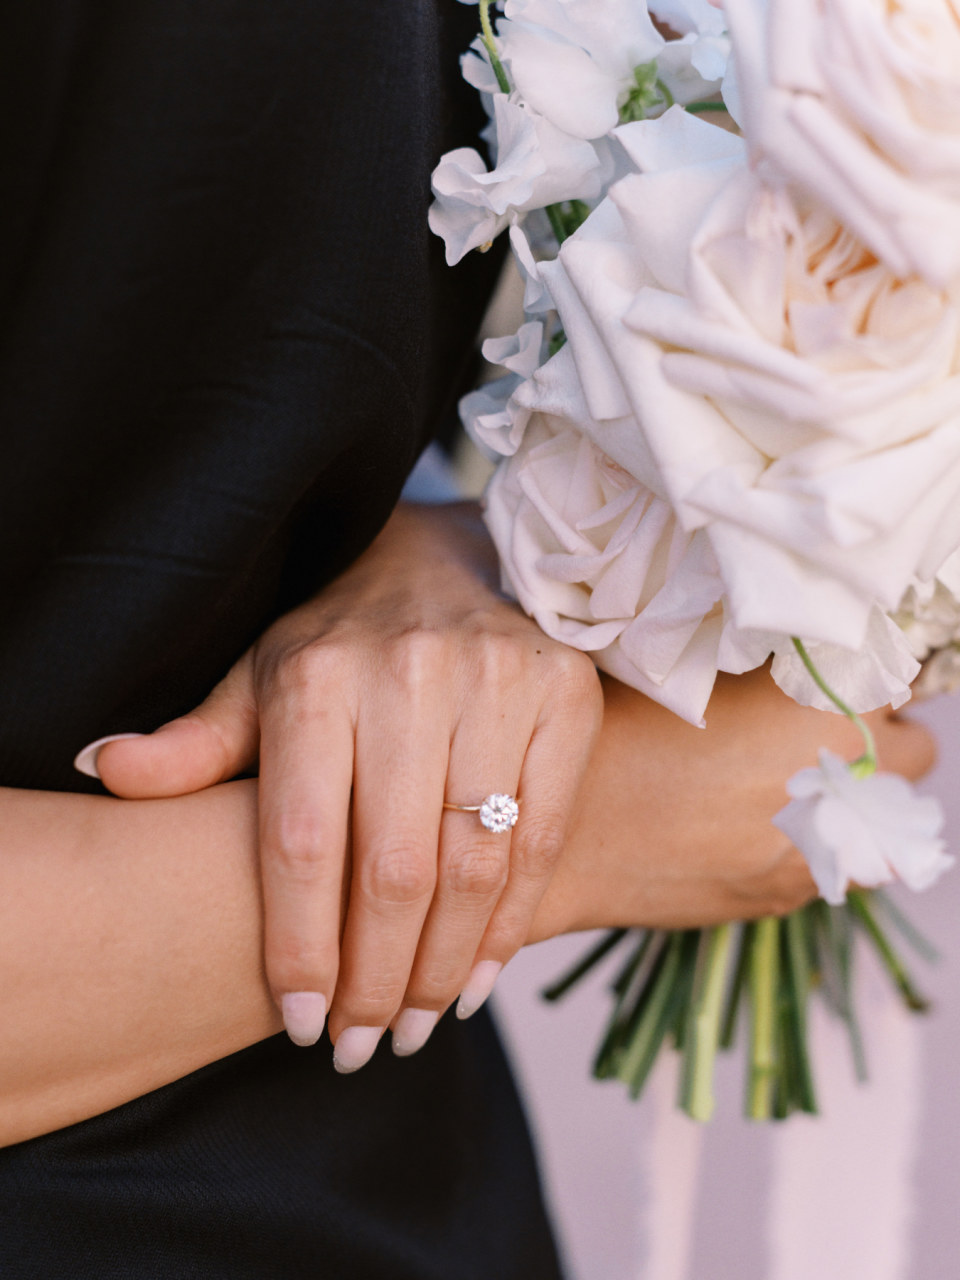 Engagement ring on woman's hand holding bouquet of pale pink flowers.